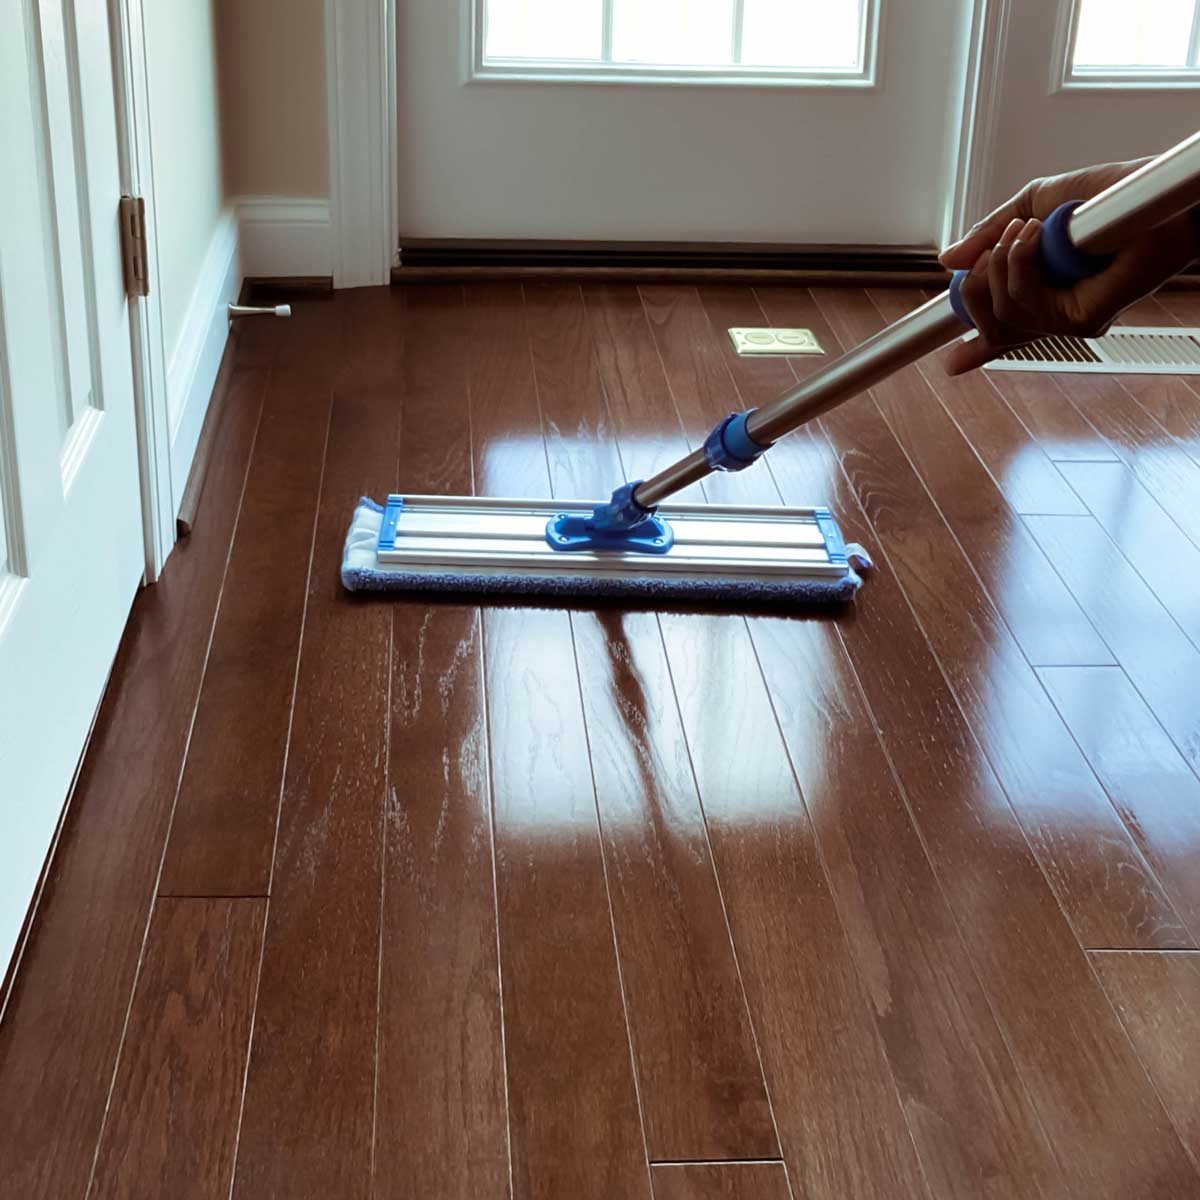 Cleaning Hardwood Floors: The Best Cleaning Products for a Gleaming Finish